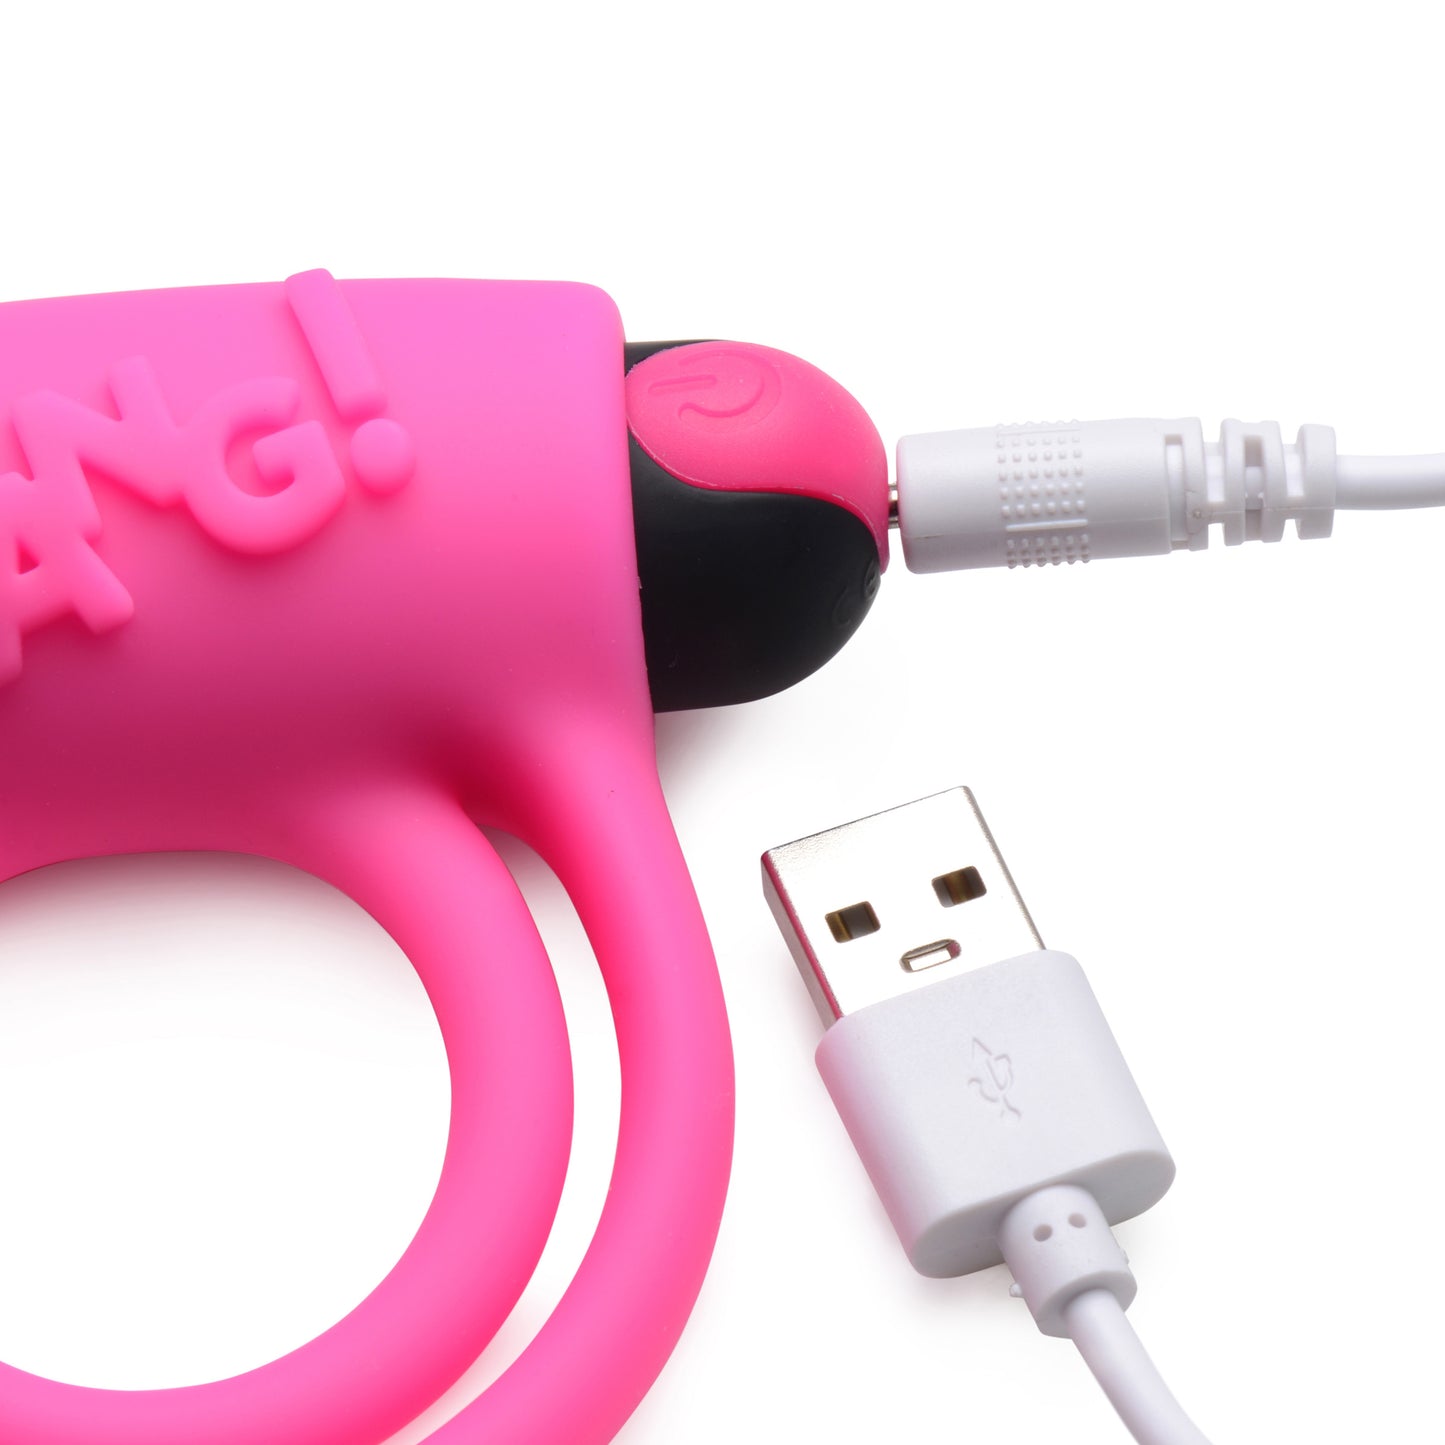 Remote Control 28X Vibrating Cock Ring and Bullet - Pink - UABDSM